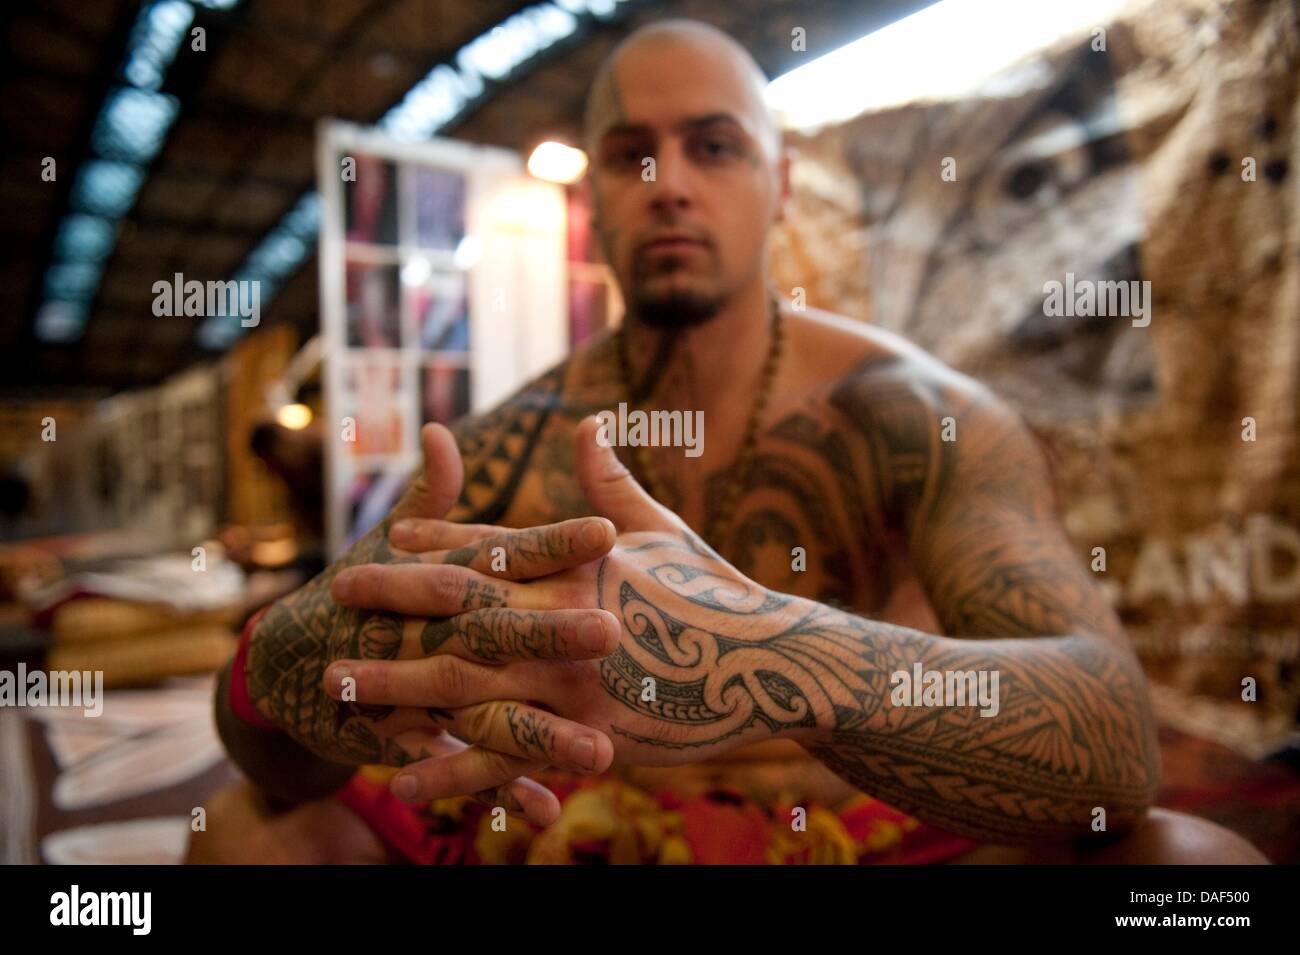 Julien Ruiz from France shows his tattoos at the 21st international tatto convention in Berlin, Germany, 02 December 2011. OVer 200 tattoo artists, 180 from abroad, are showing the newest tattoo techniques, design and color creations until Sunday, 04 December 2011. Photo: SEBASTIAN KAHNERT Stock Photo